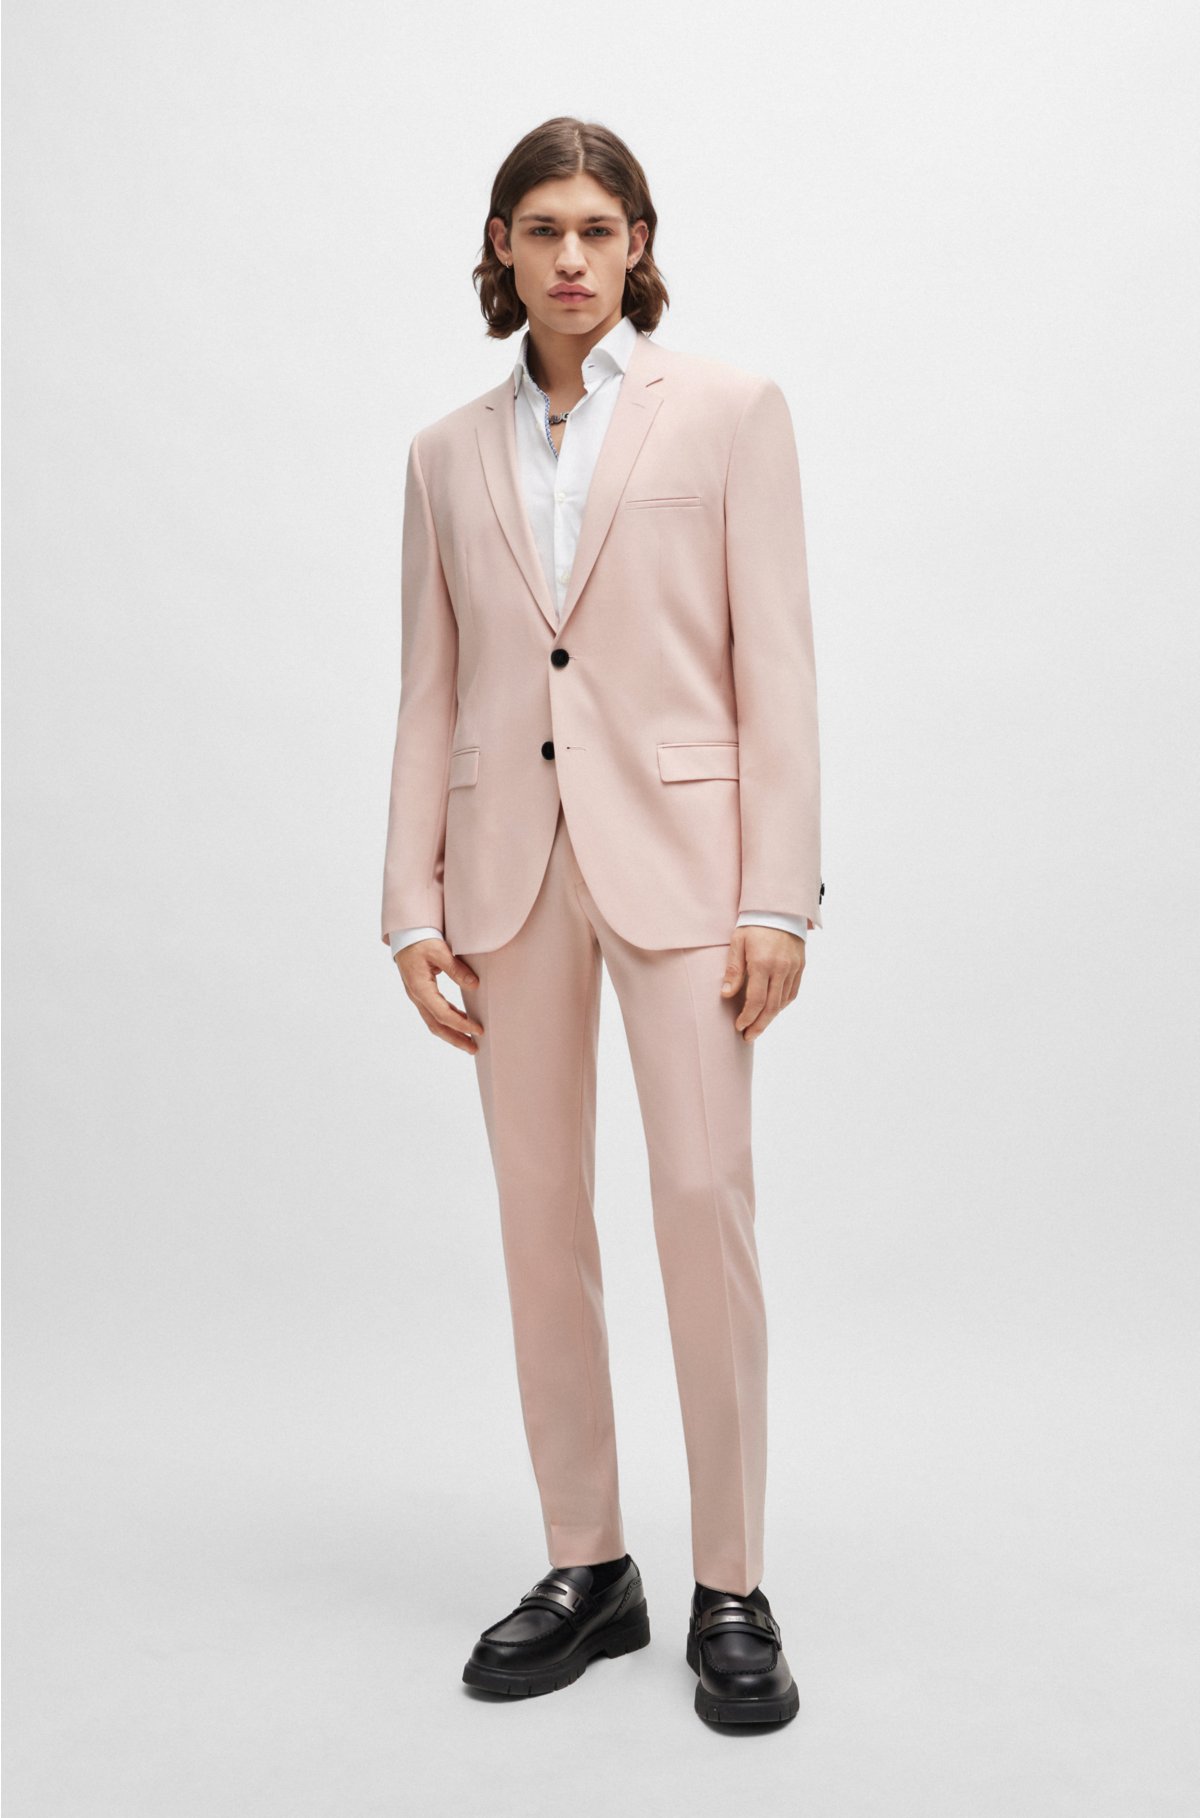 Pastel pink suit (Fashion and style)